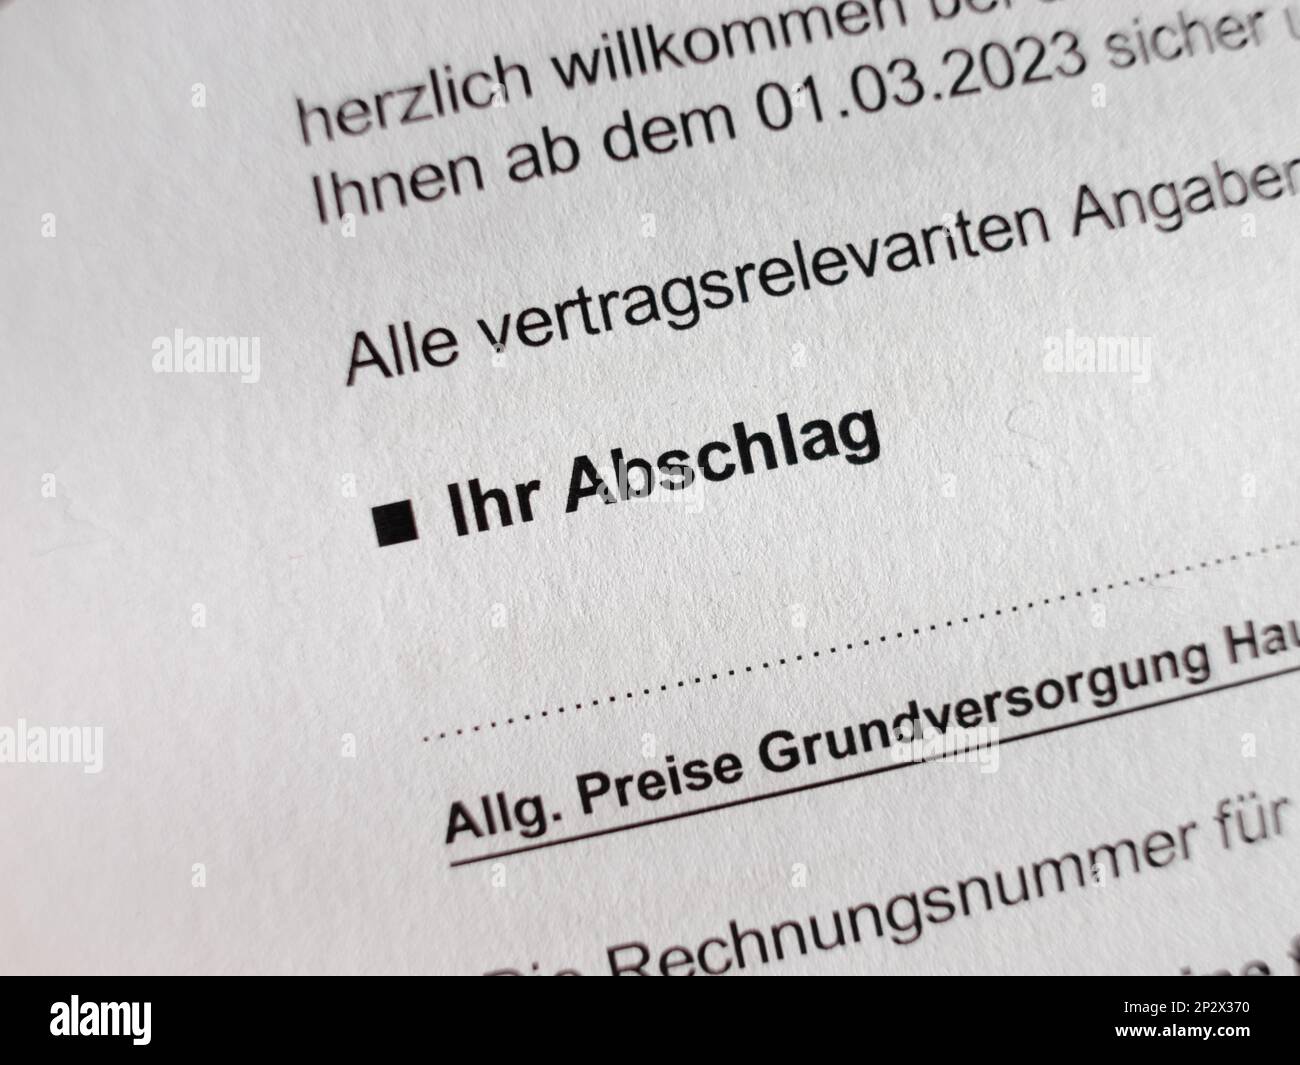 Ihr Abschlag (your costs) in bold letters printed on paper. Part of a German electricity contract that says how much must be payed per month. Stock Photo